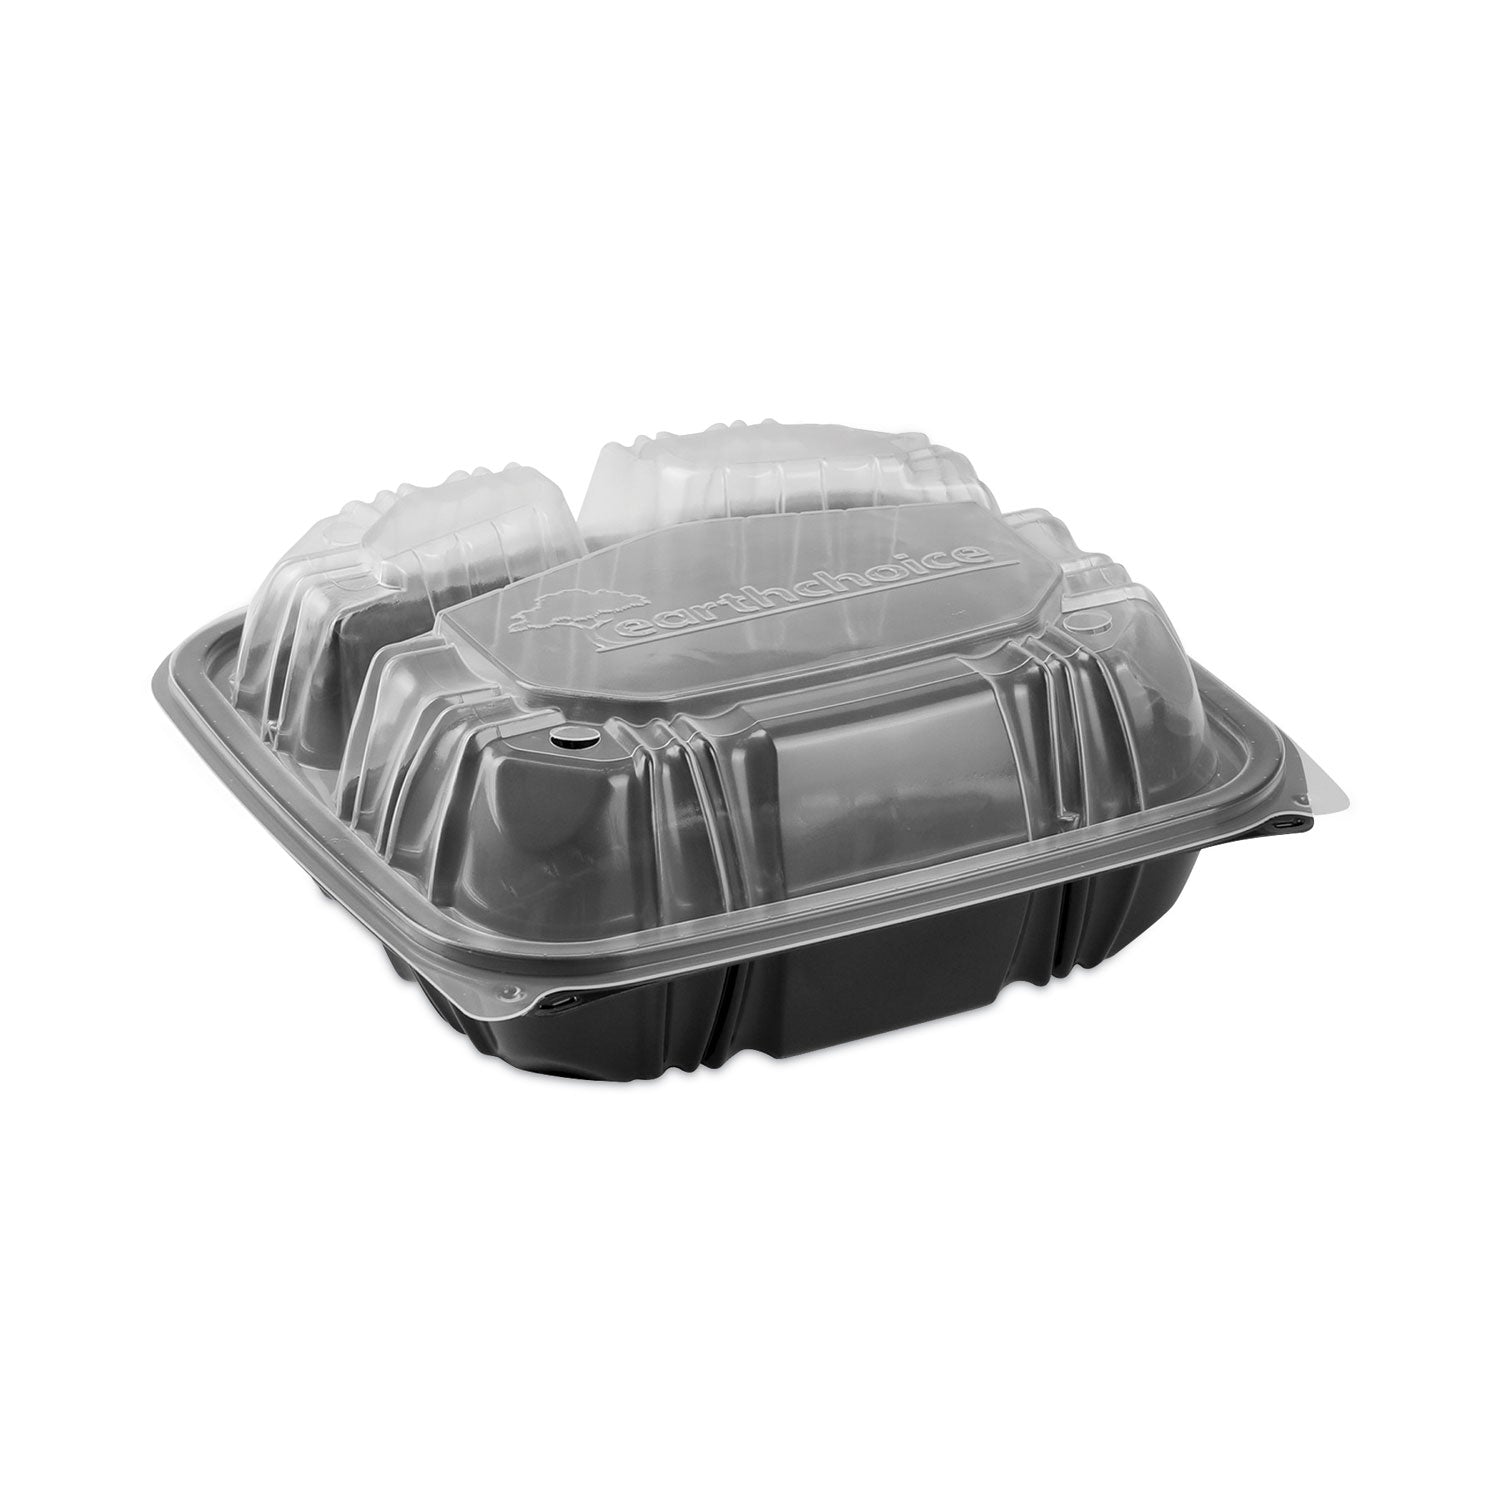 earthchoice-vented-dual-color-microwavable-hinged-lid-container-33oz-85x85x3-3-compartment-black-clear-plastic-150-ct_pctdc858330b000 - 1